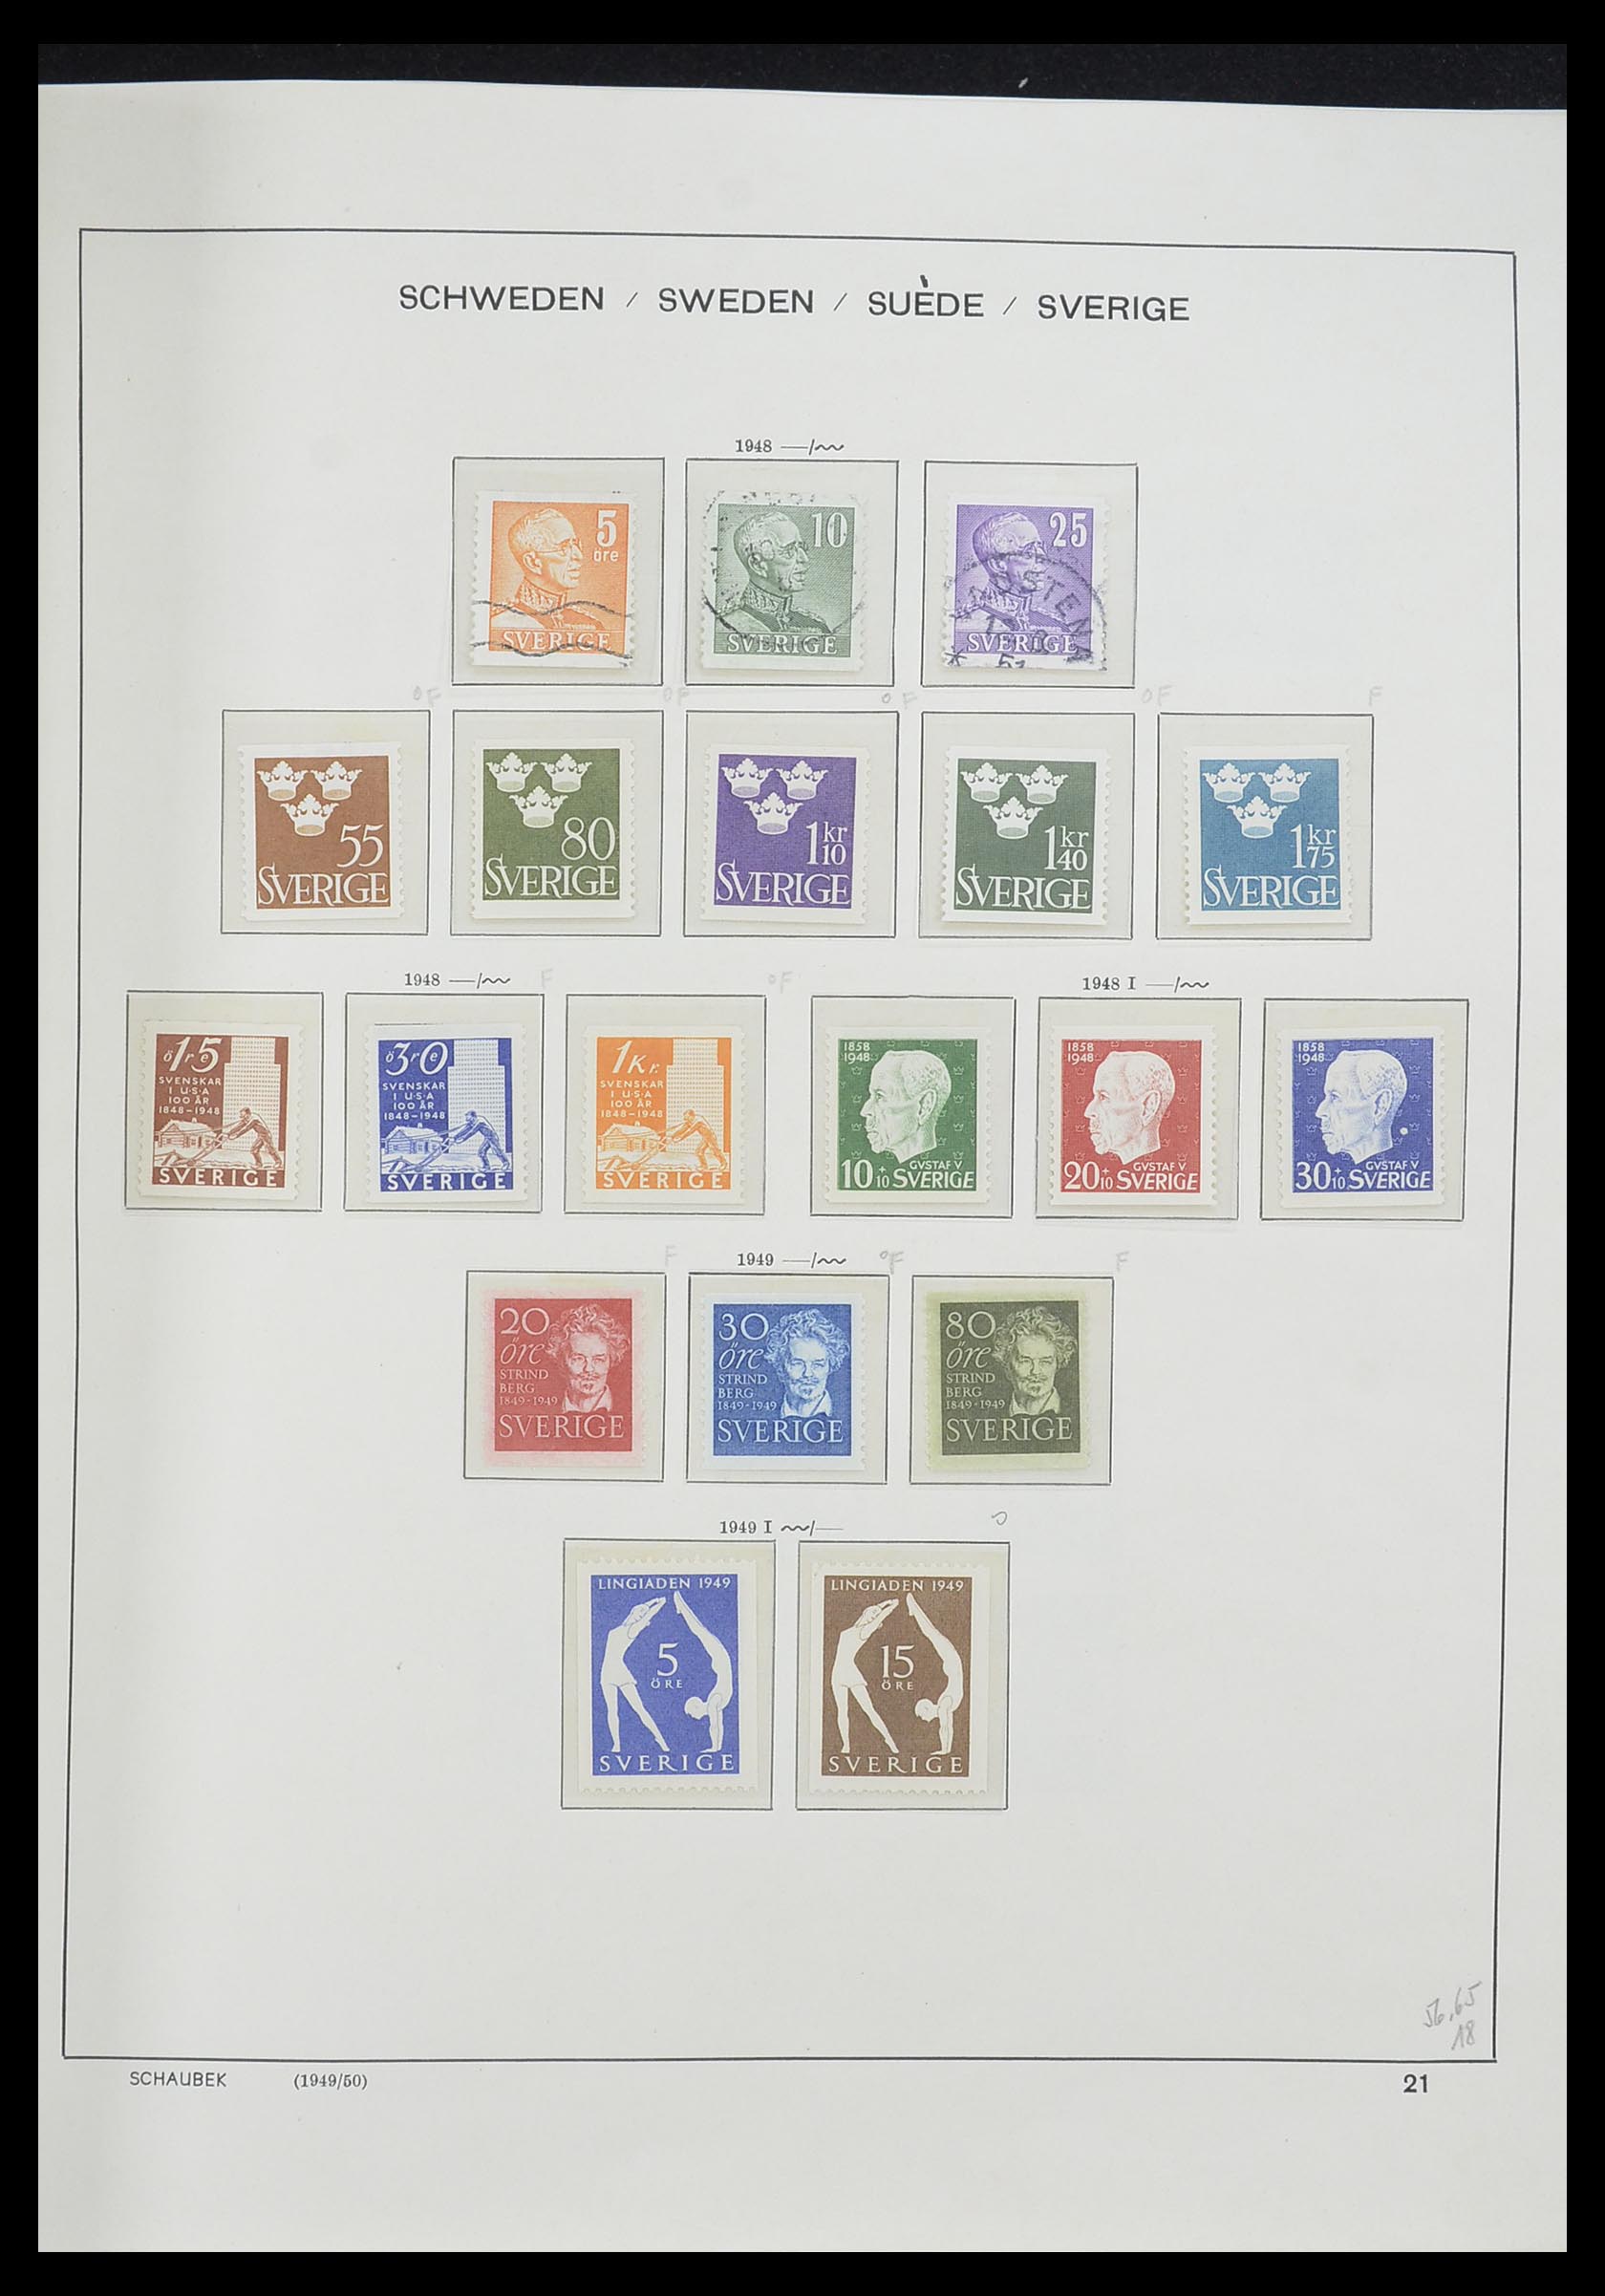 33293 035 - Stamp collection 33293 Sweden 1855-1996.